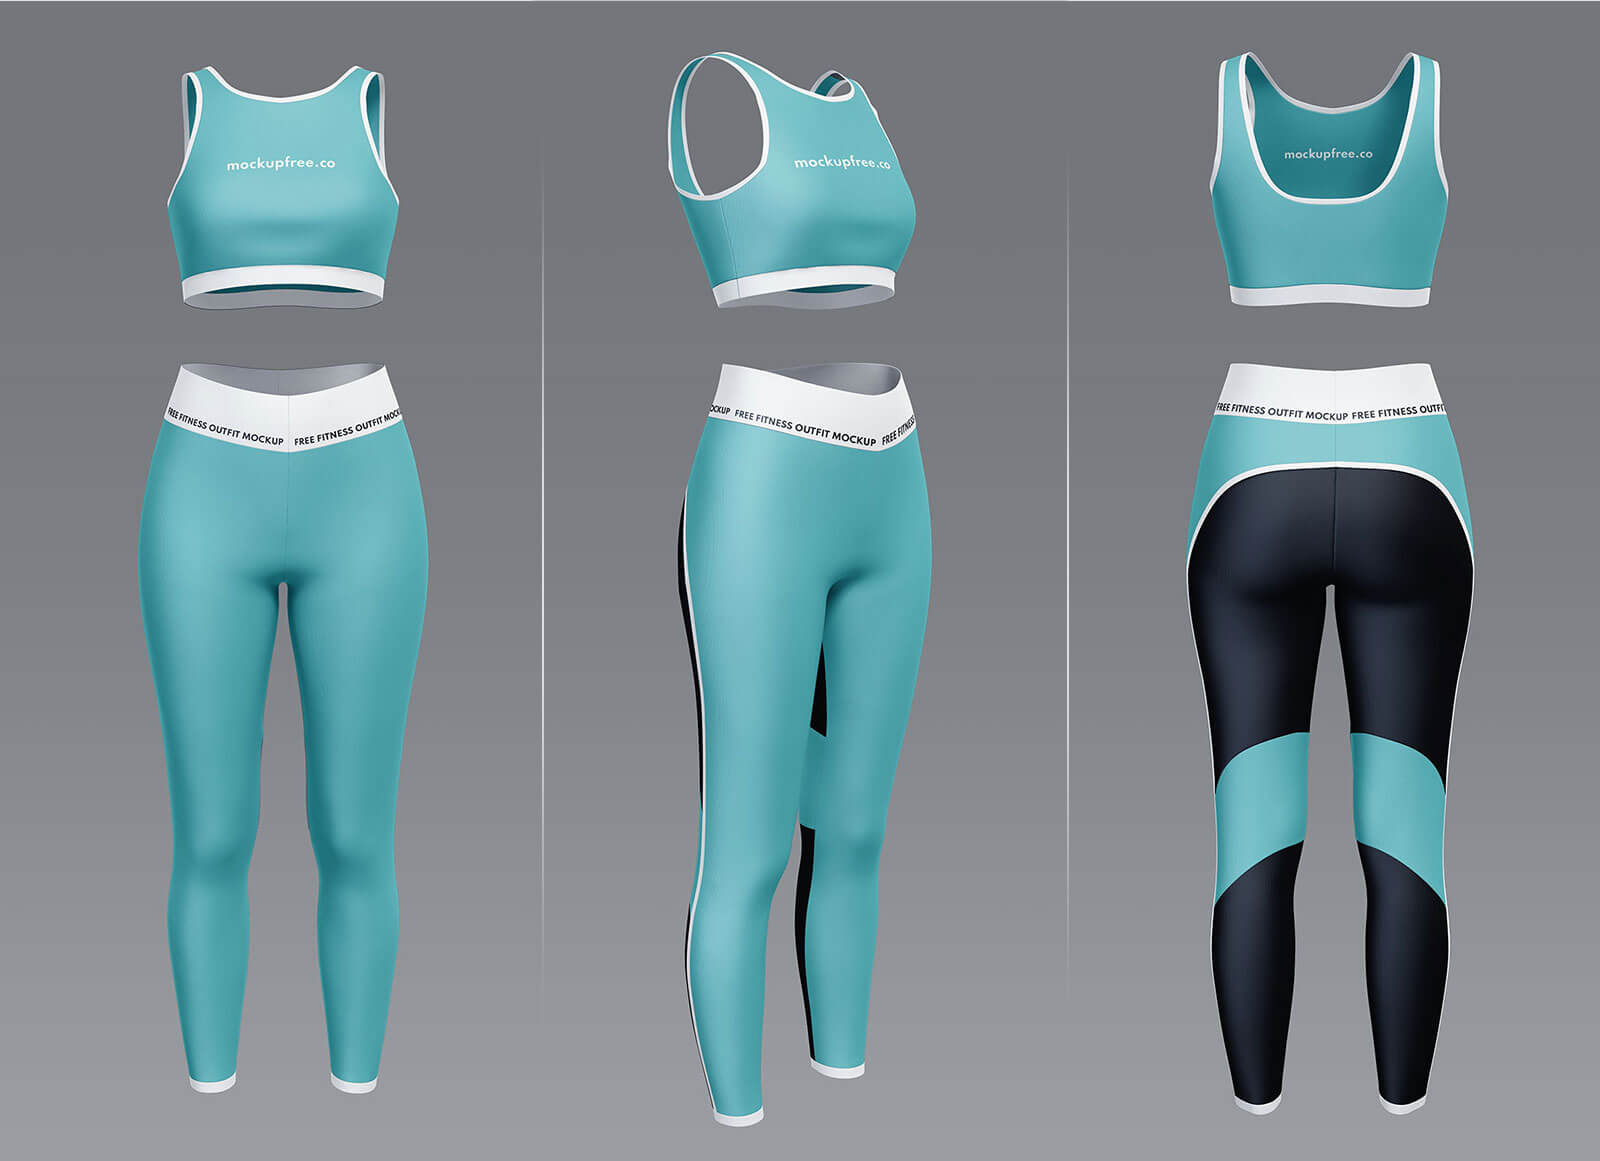 Free Women's Fitness Outfit (Clothes) Mockup PSD - Good Mockups